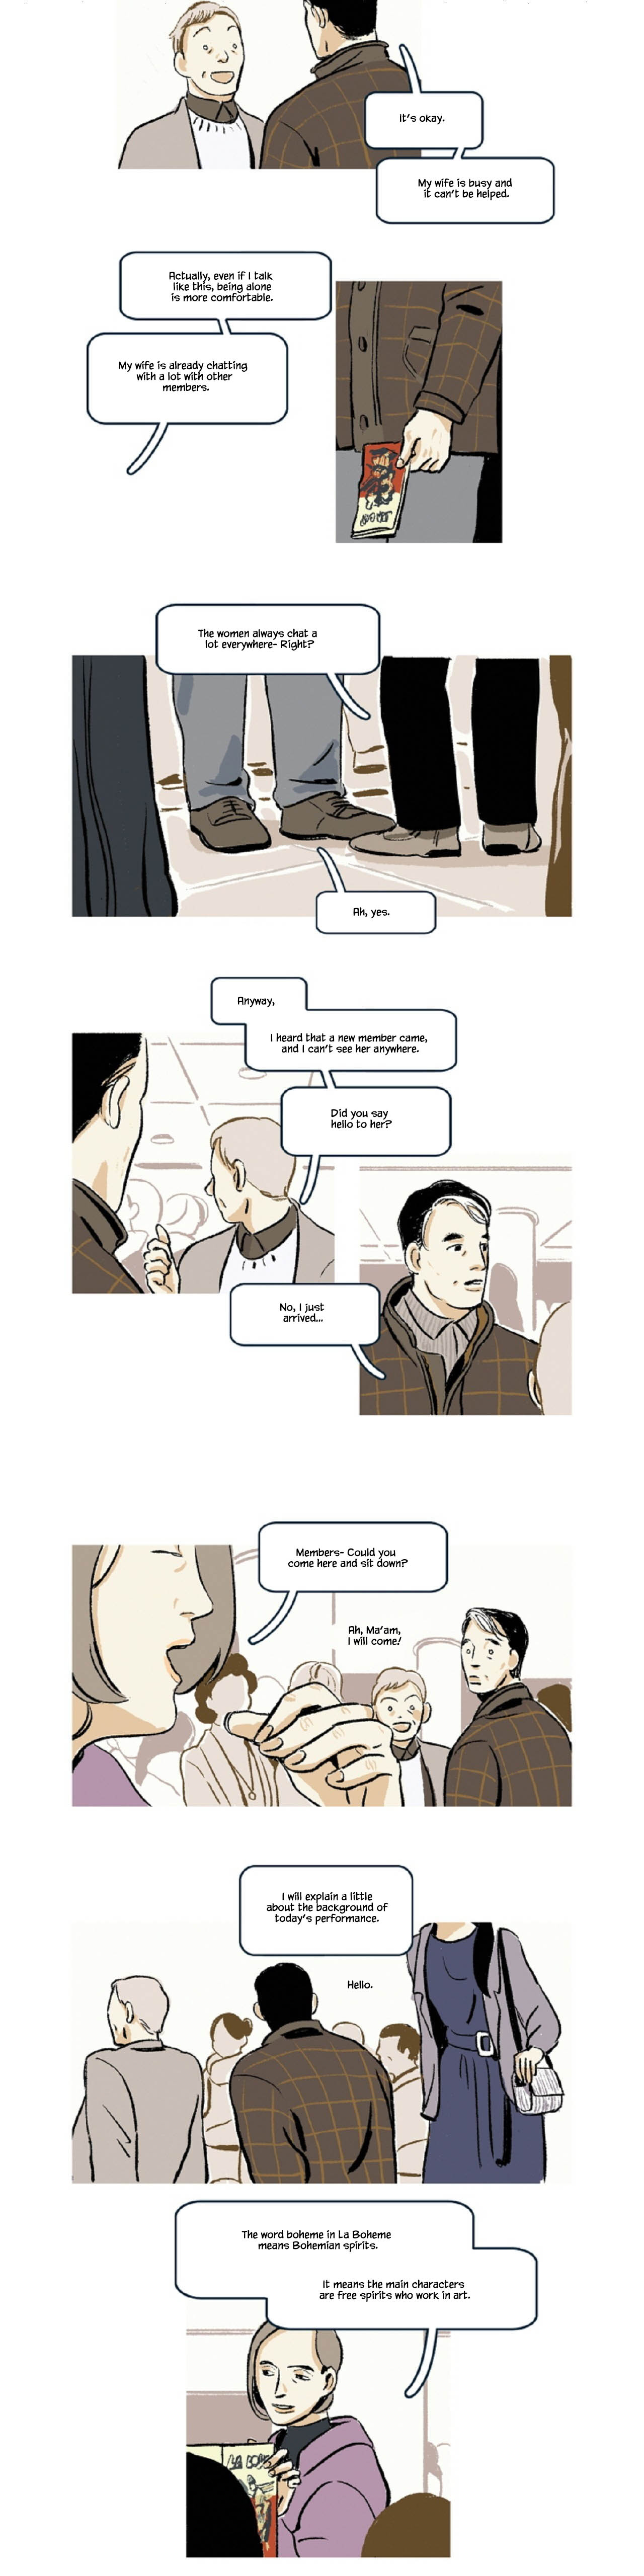 The Professor Who Reads Love Stories - Page 2